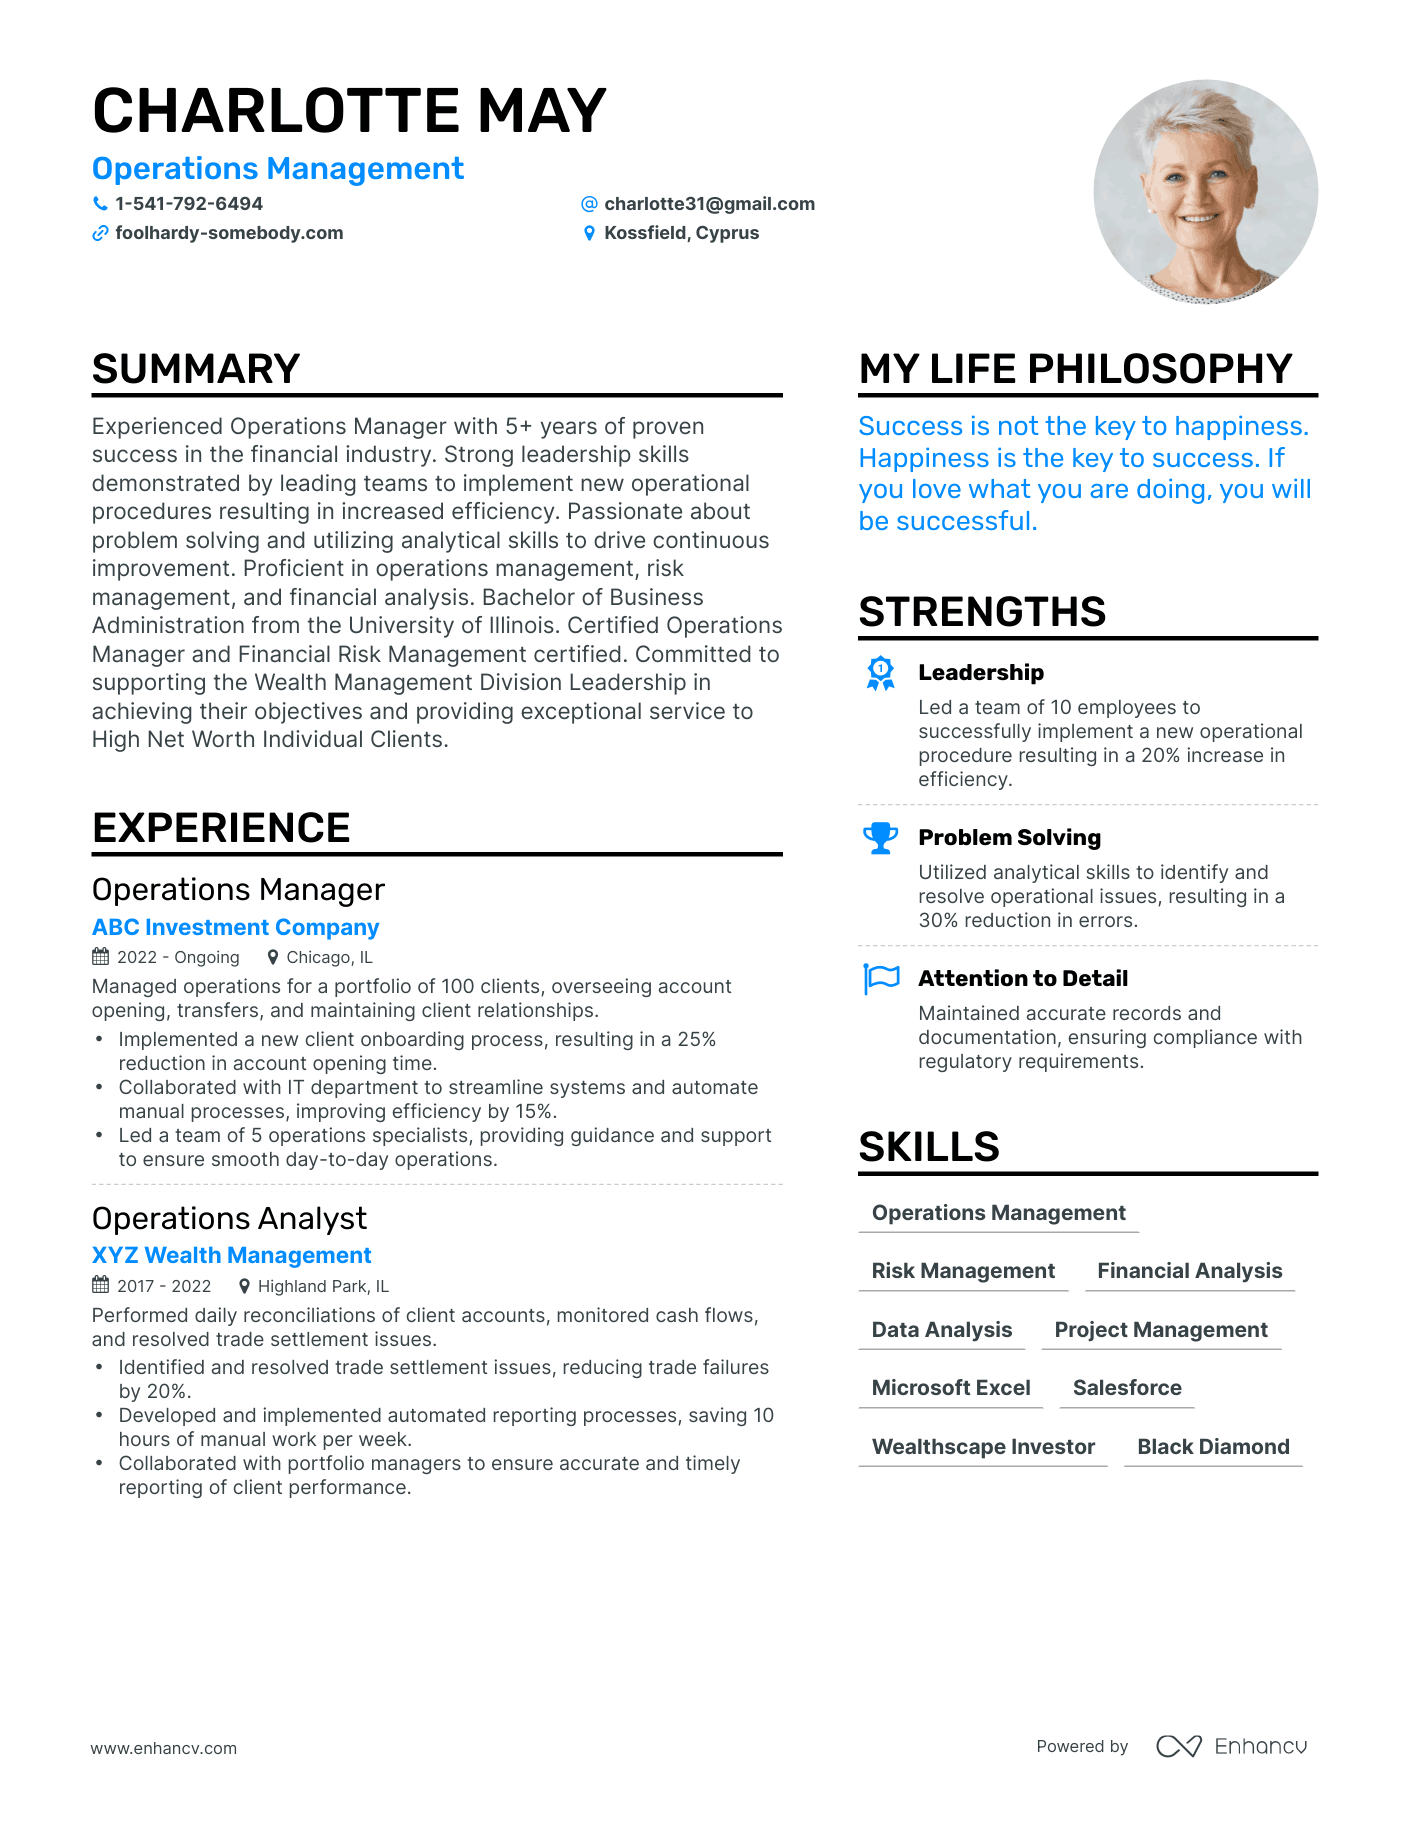 Operations Management resume example